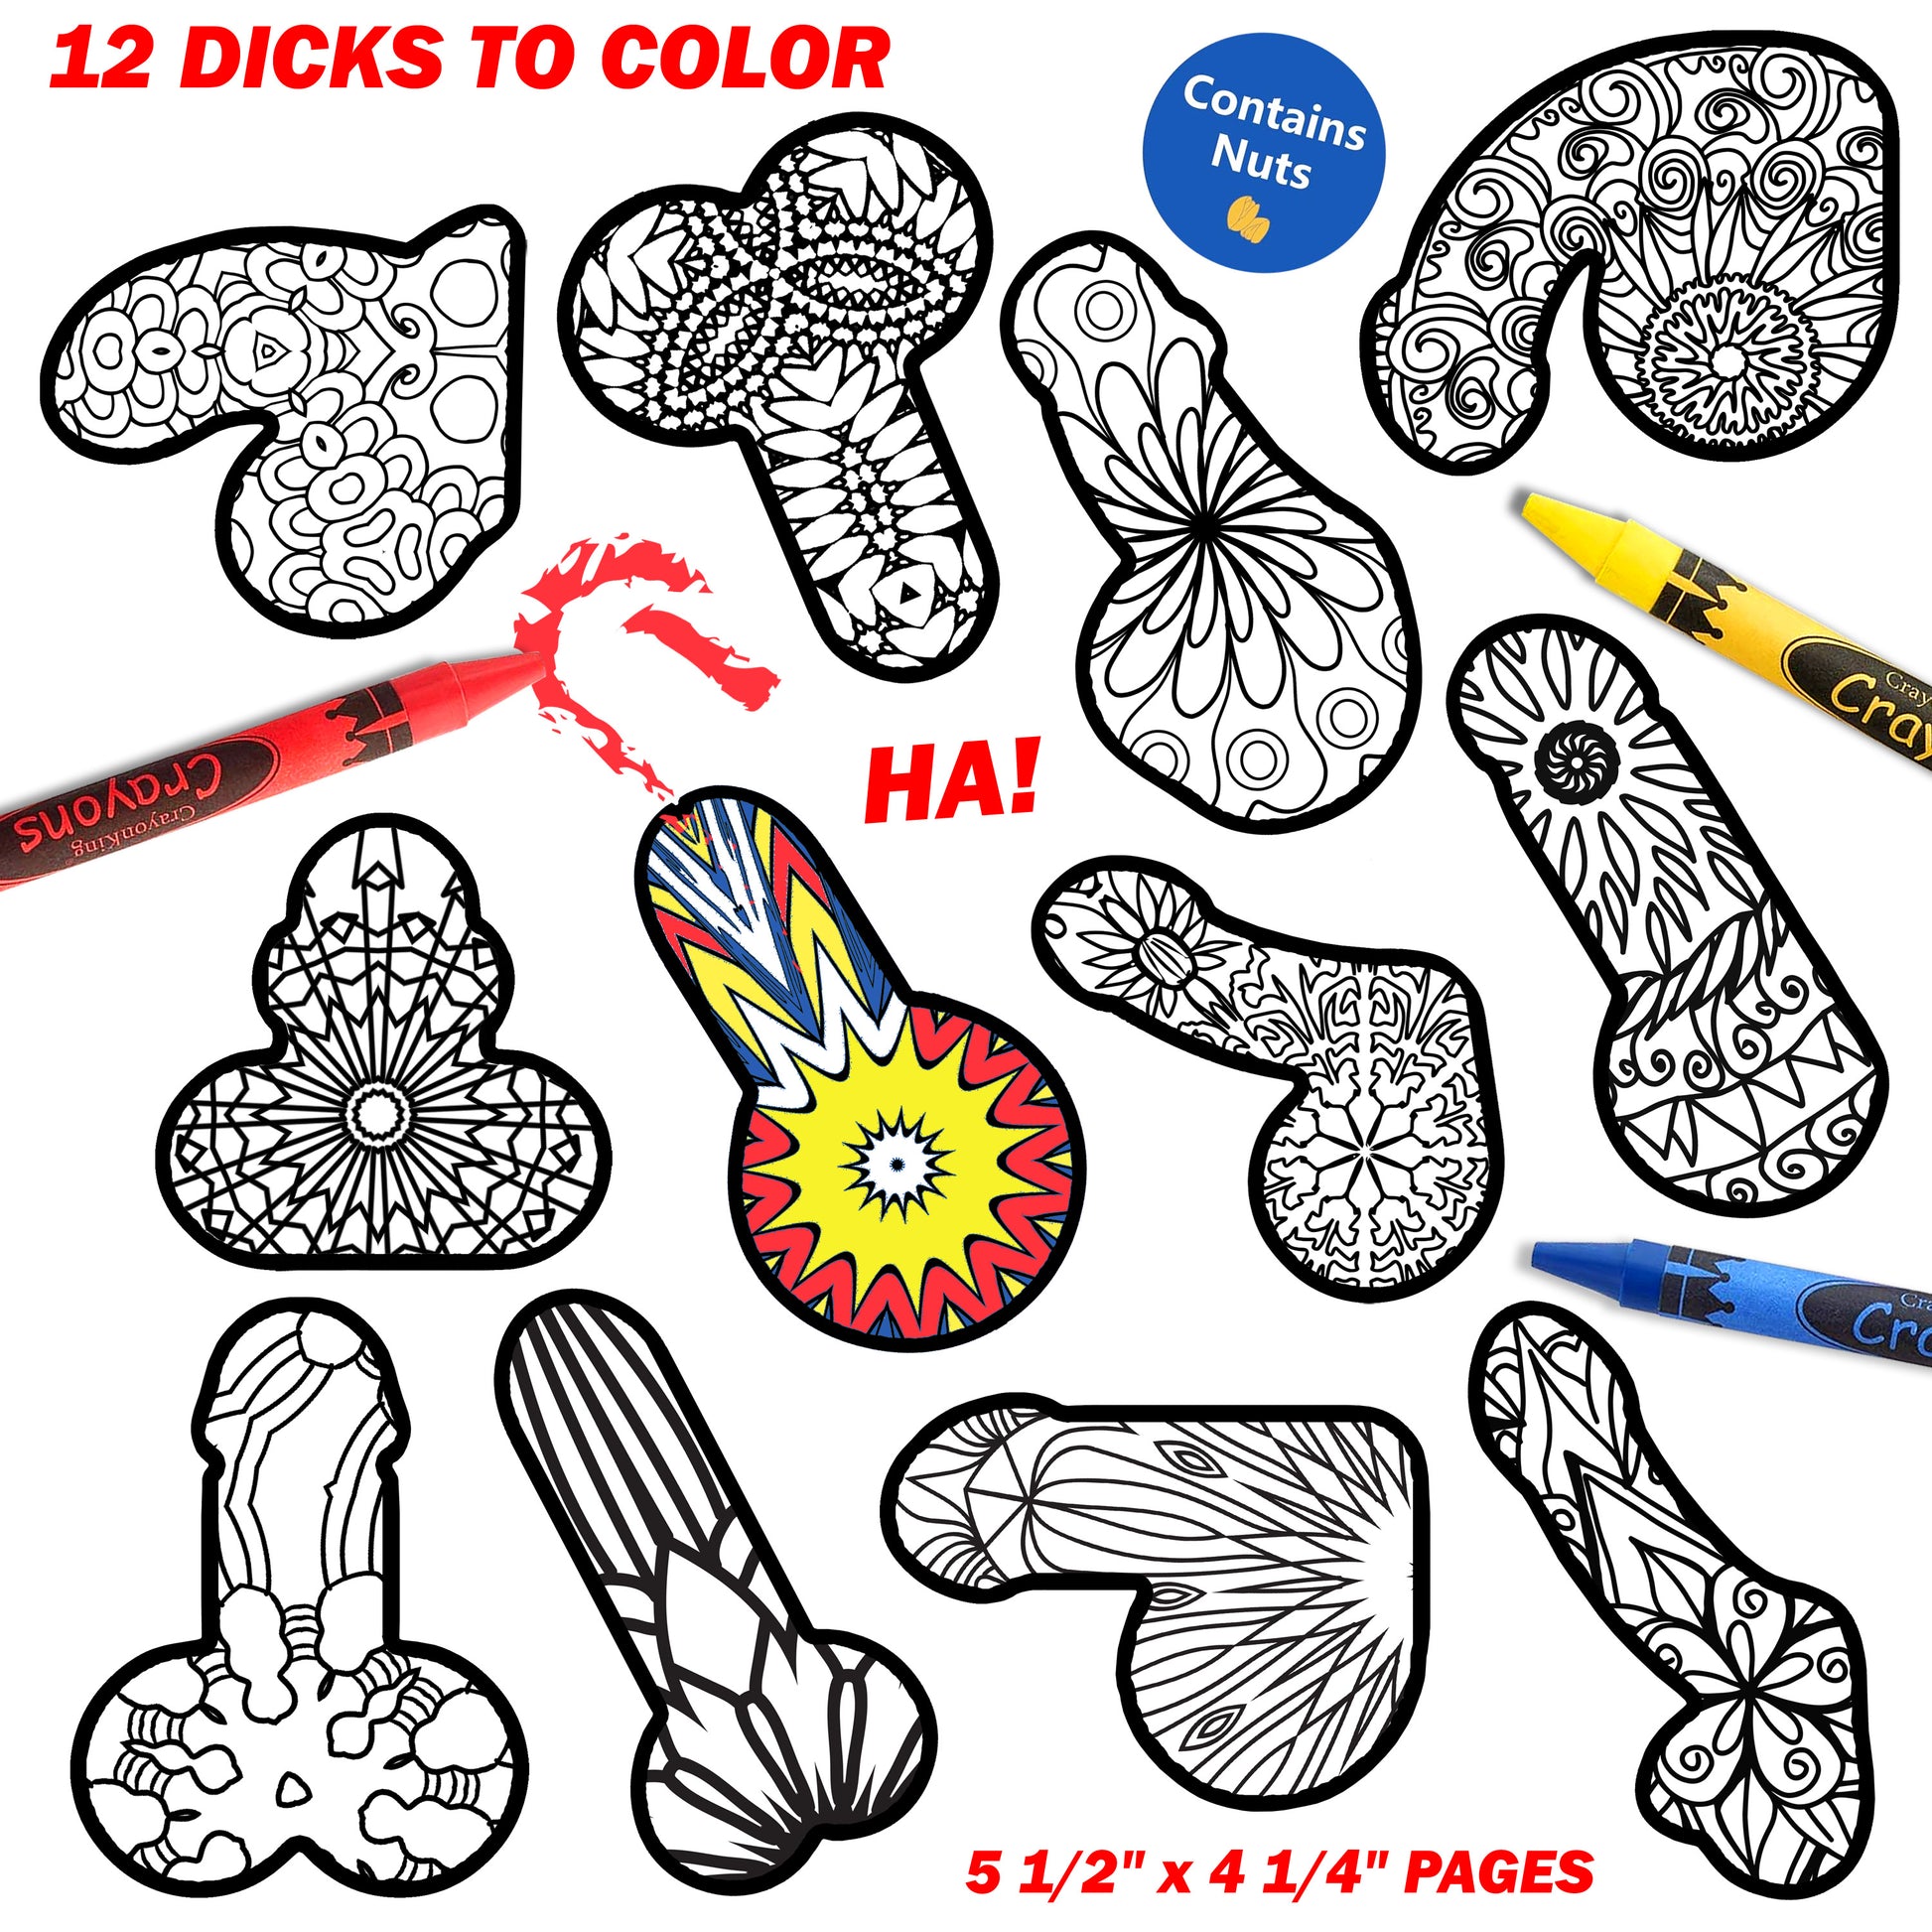 Adult Coloring Book Gag Gift